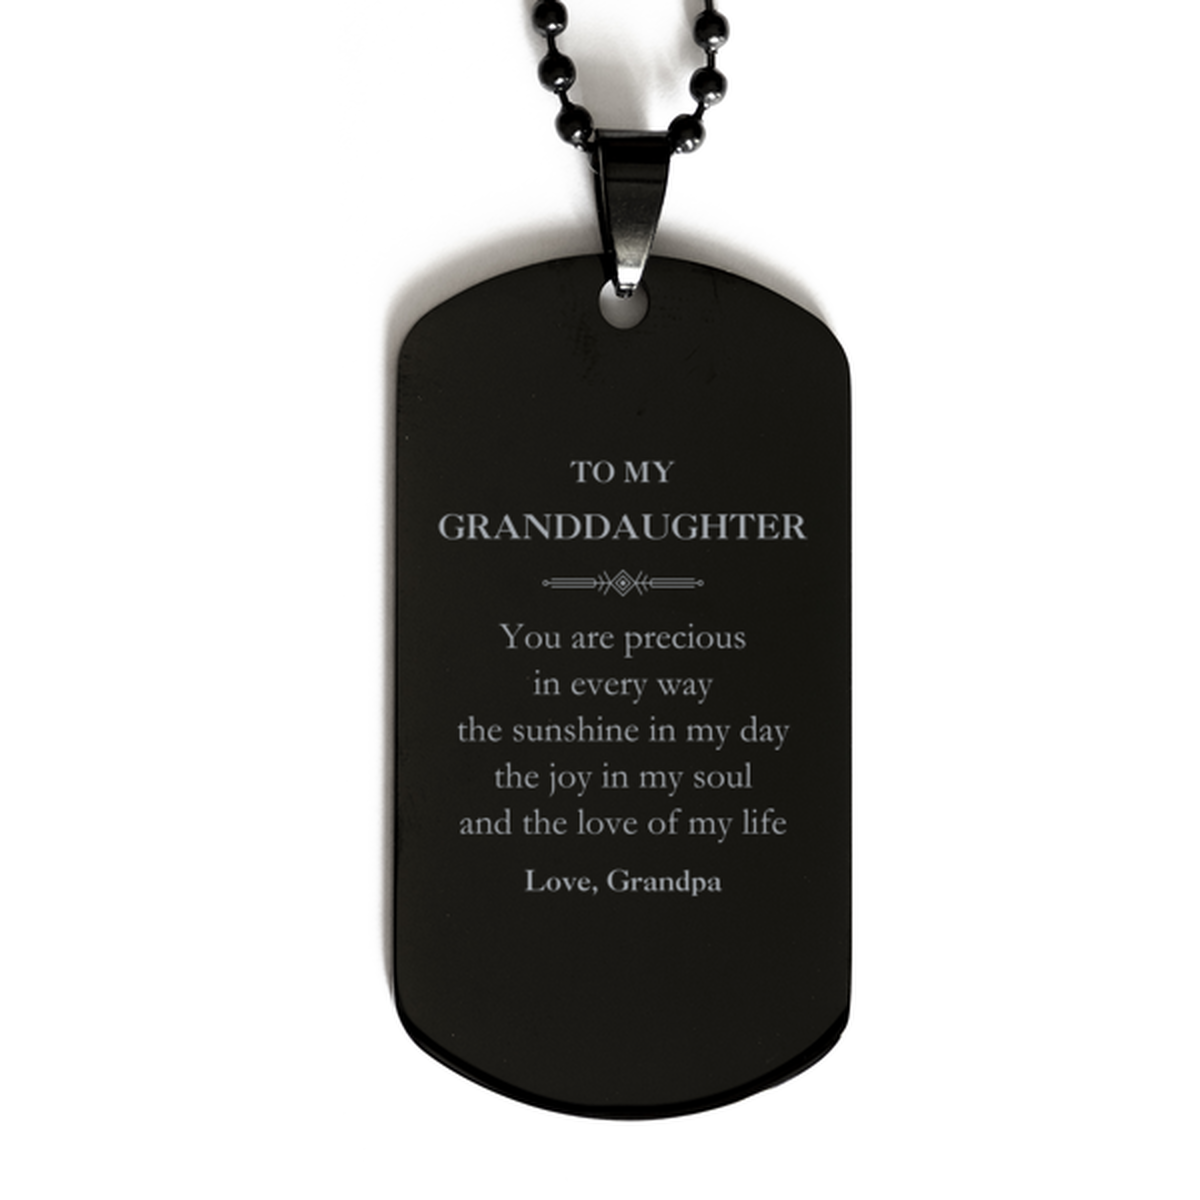 Graduation Gifts for Granddaughter Black Dog Tag Present from Grandpa, Christmas Granddaughter Birthday Gifts Granddaughter You are precious in every way the sunshine in my day. Love, Grandpa